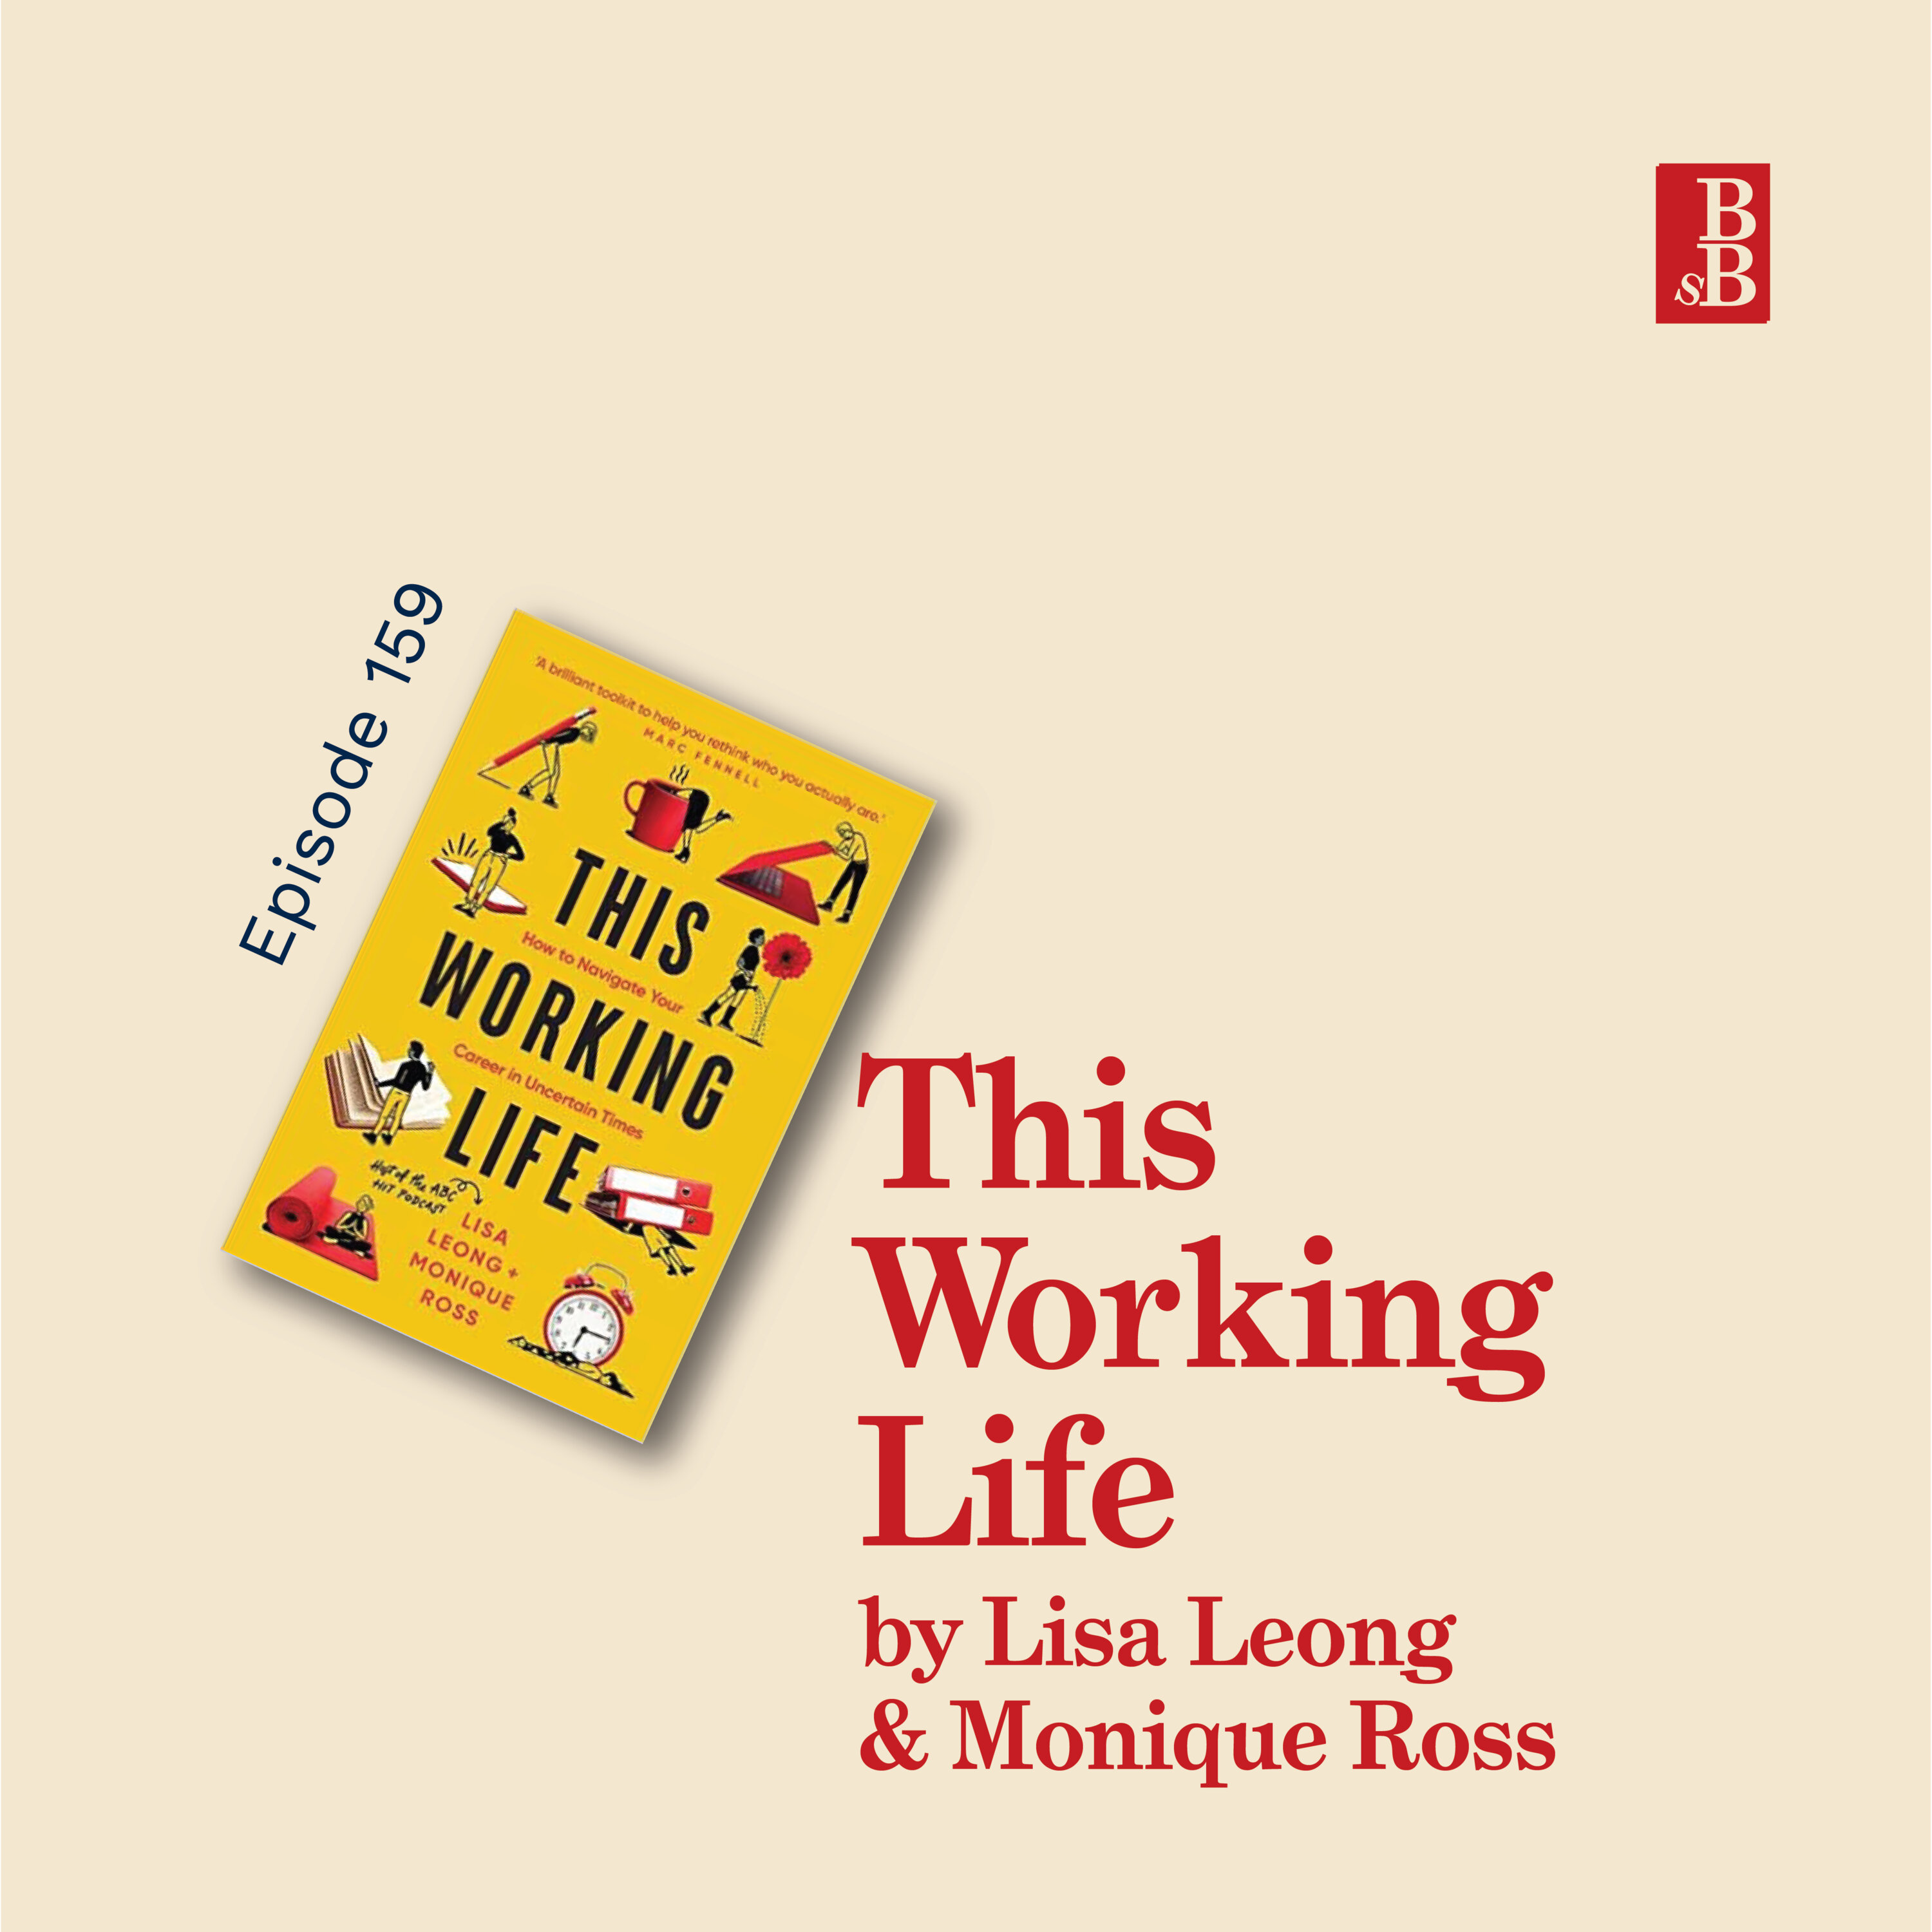 This Working Life by Lisa Leong & Monique Ross: how to reimagine work for the better Image